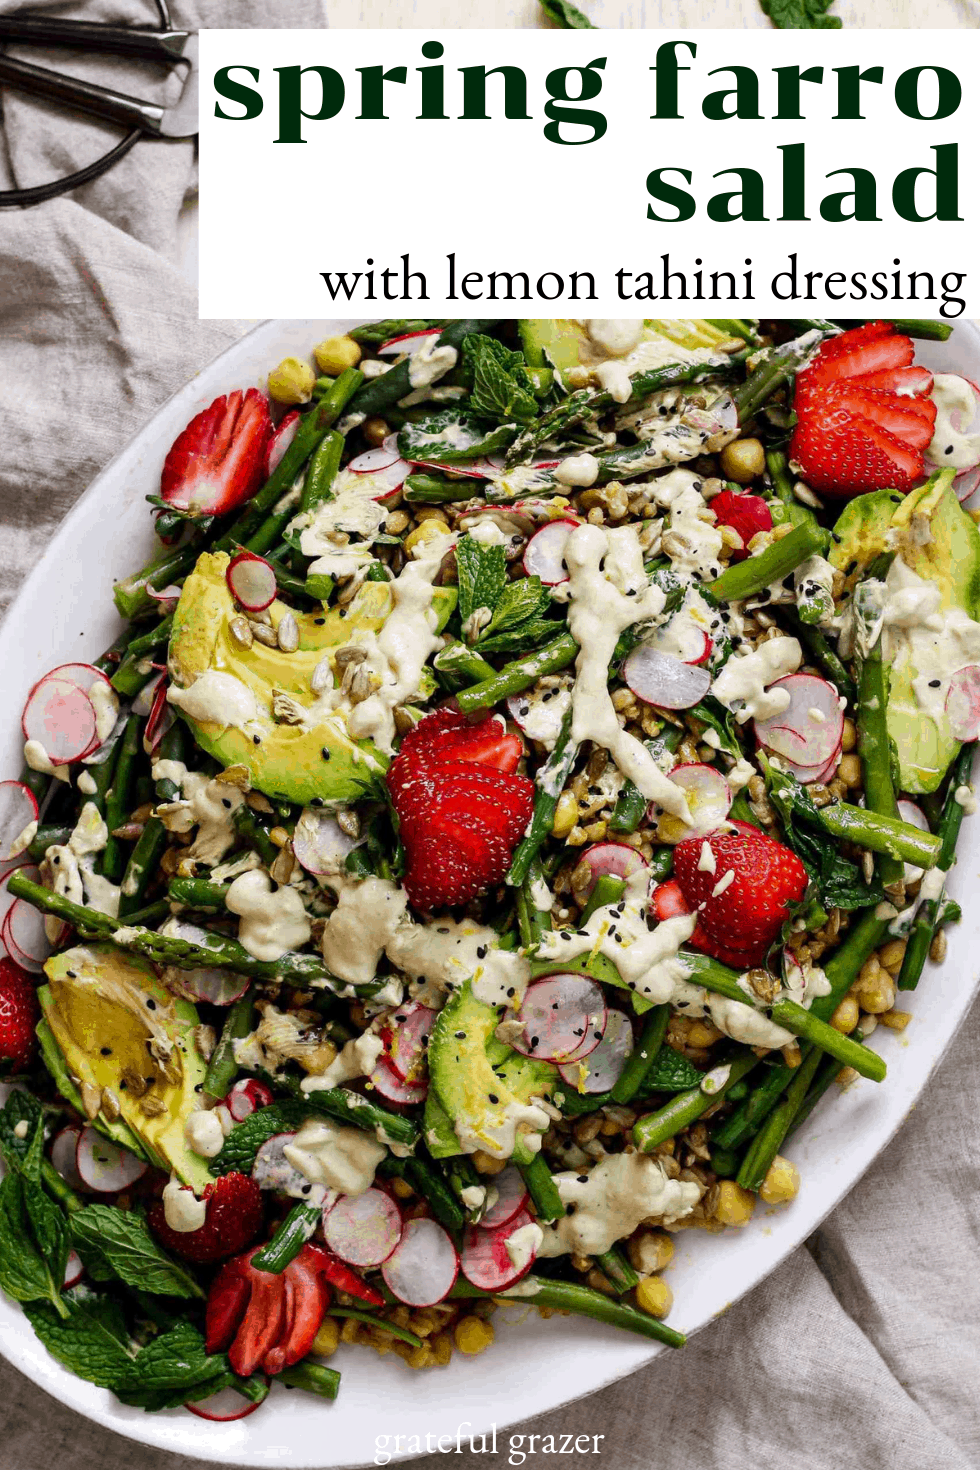 Title reads "spring farro salad with lemon tahini dressing." Green salad with avocado, grain, and strawberries on white platter with cream napkin.